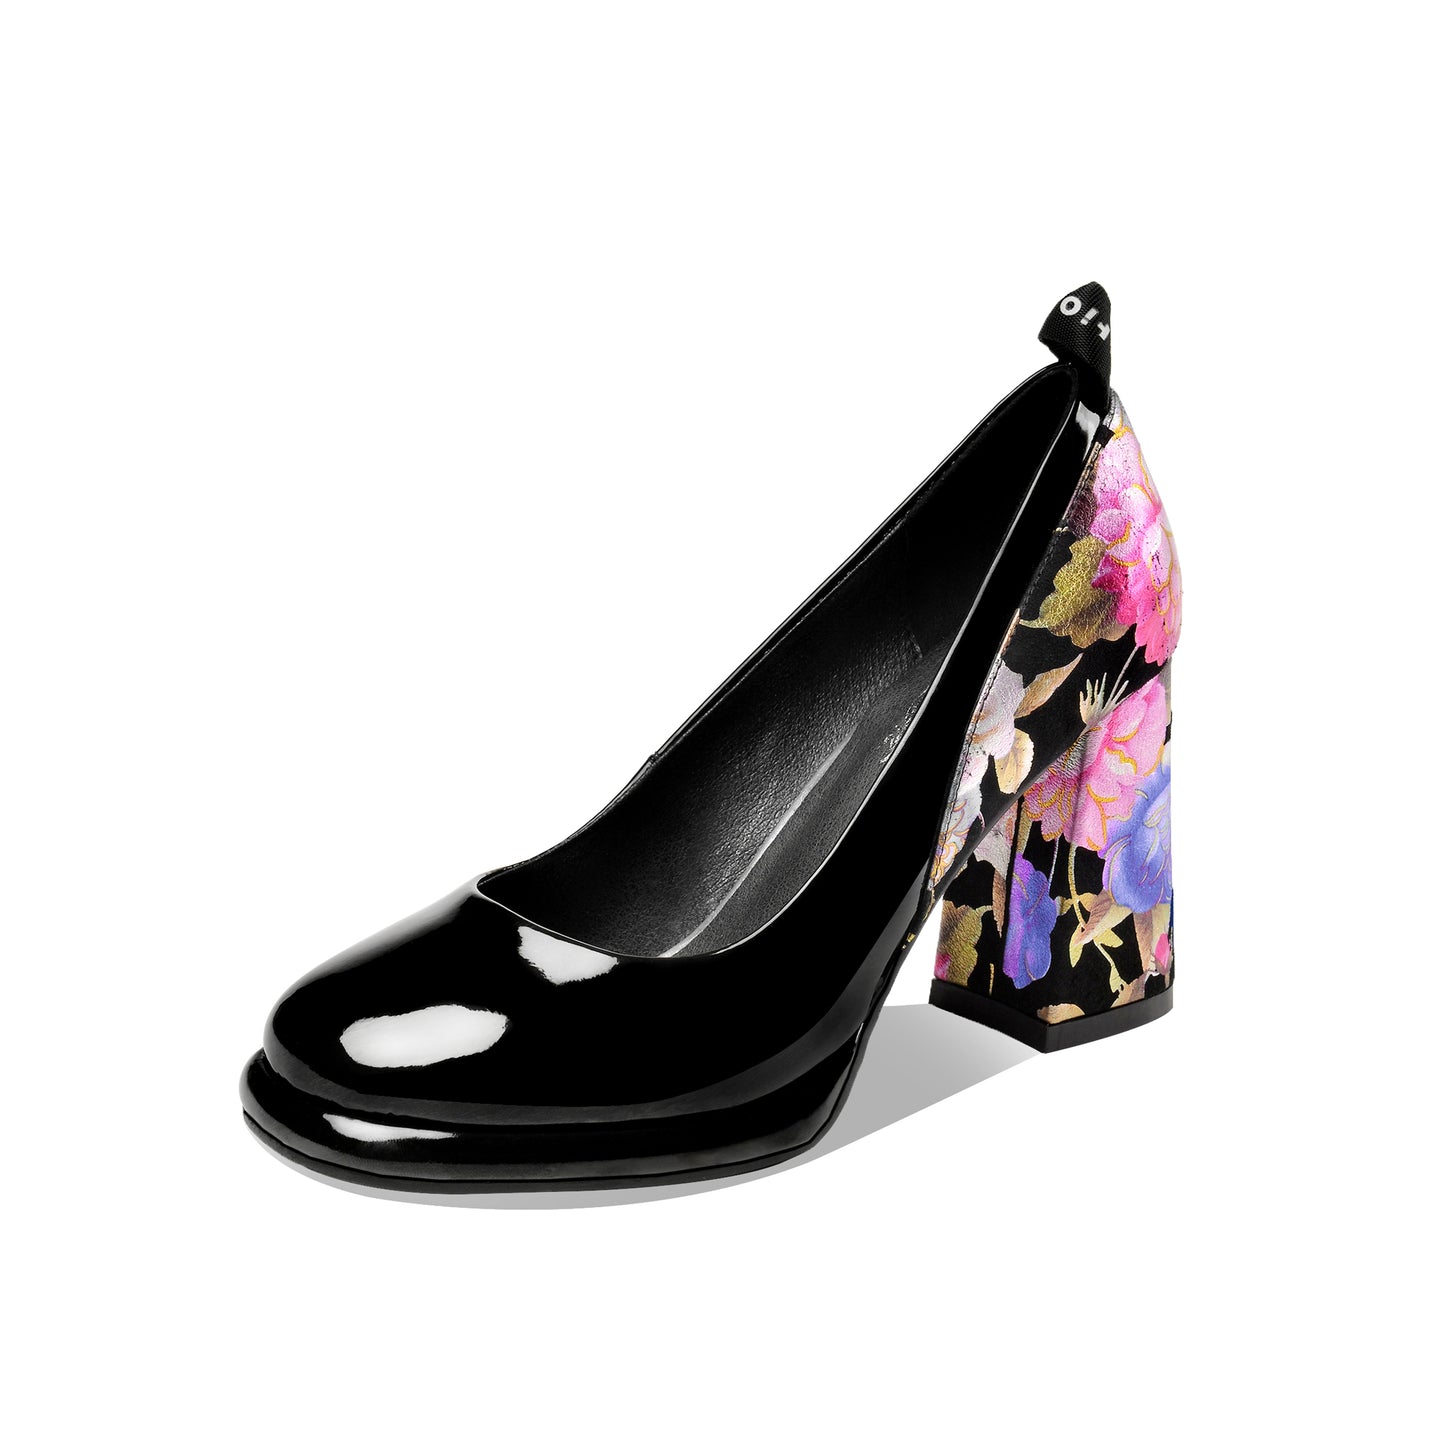 TinaCus Women's Round Toe Floral Patent Leather Handmade Platform High Chunky Heel Unique Pump Shoes